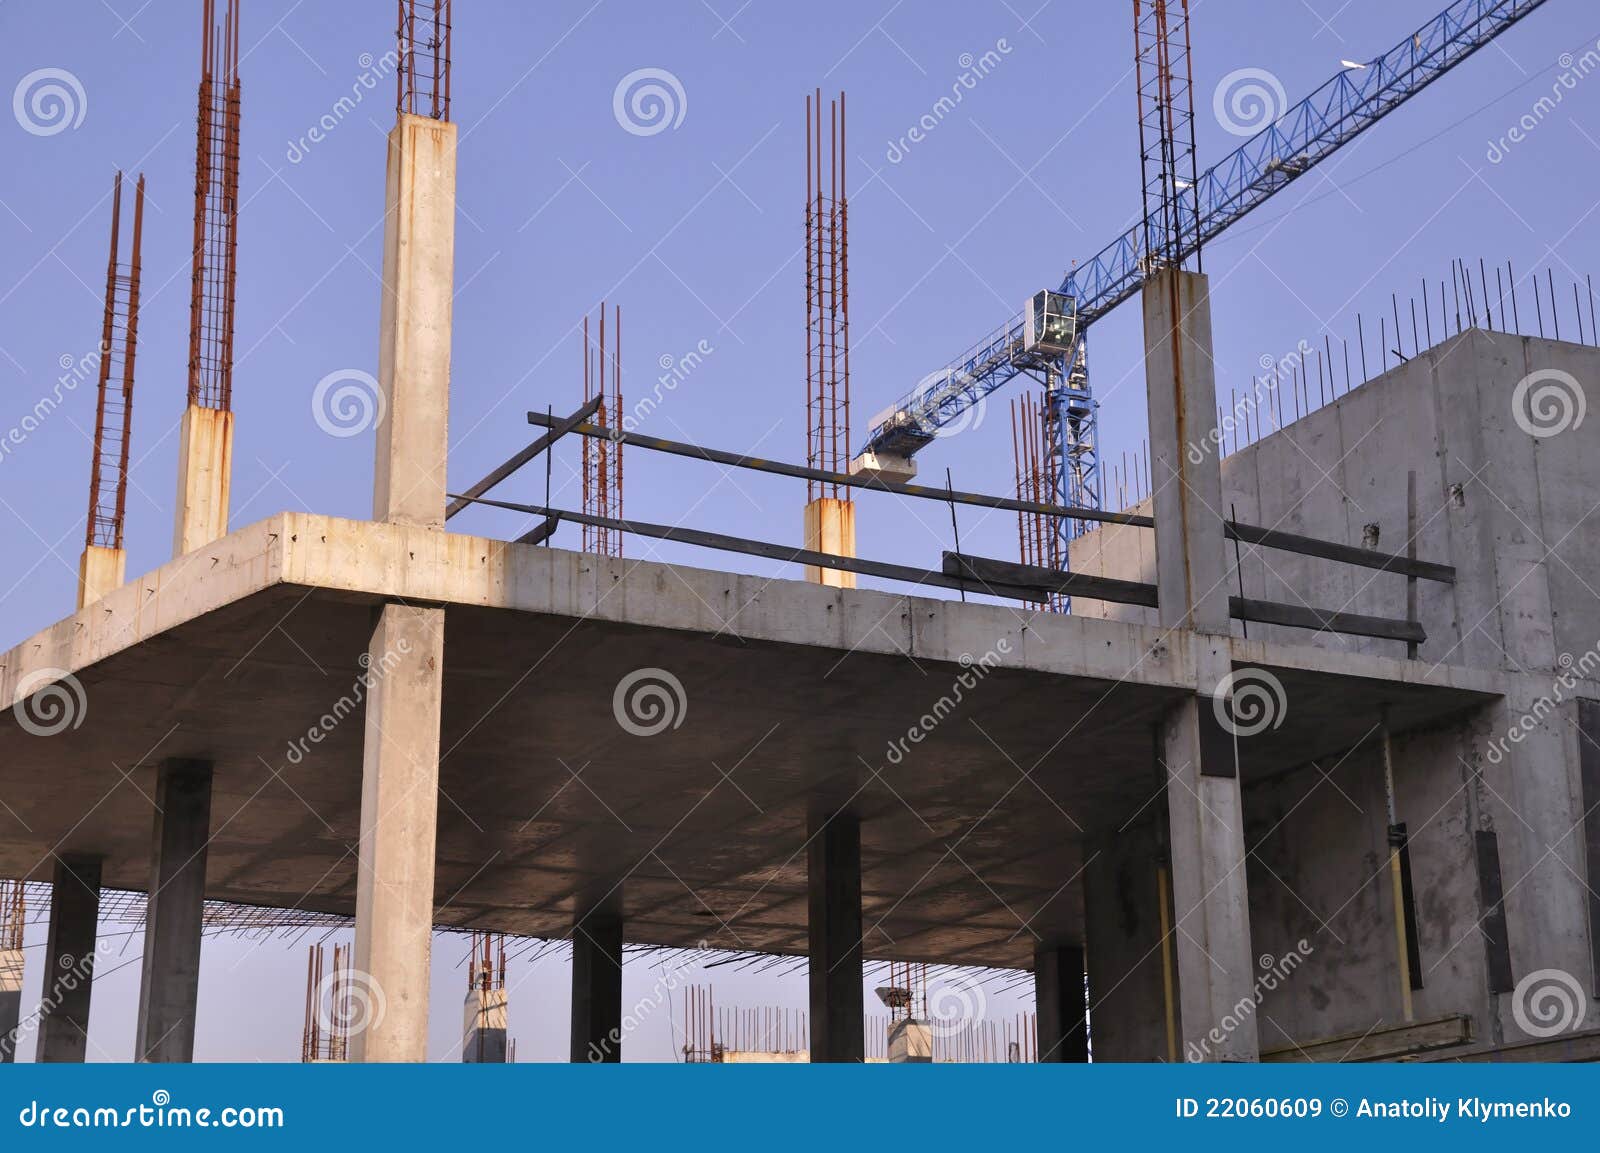 Construction. Concrete Structures. Royalty Free Stock Images - Image